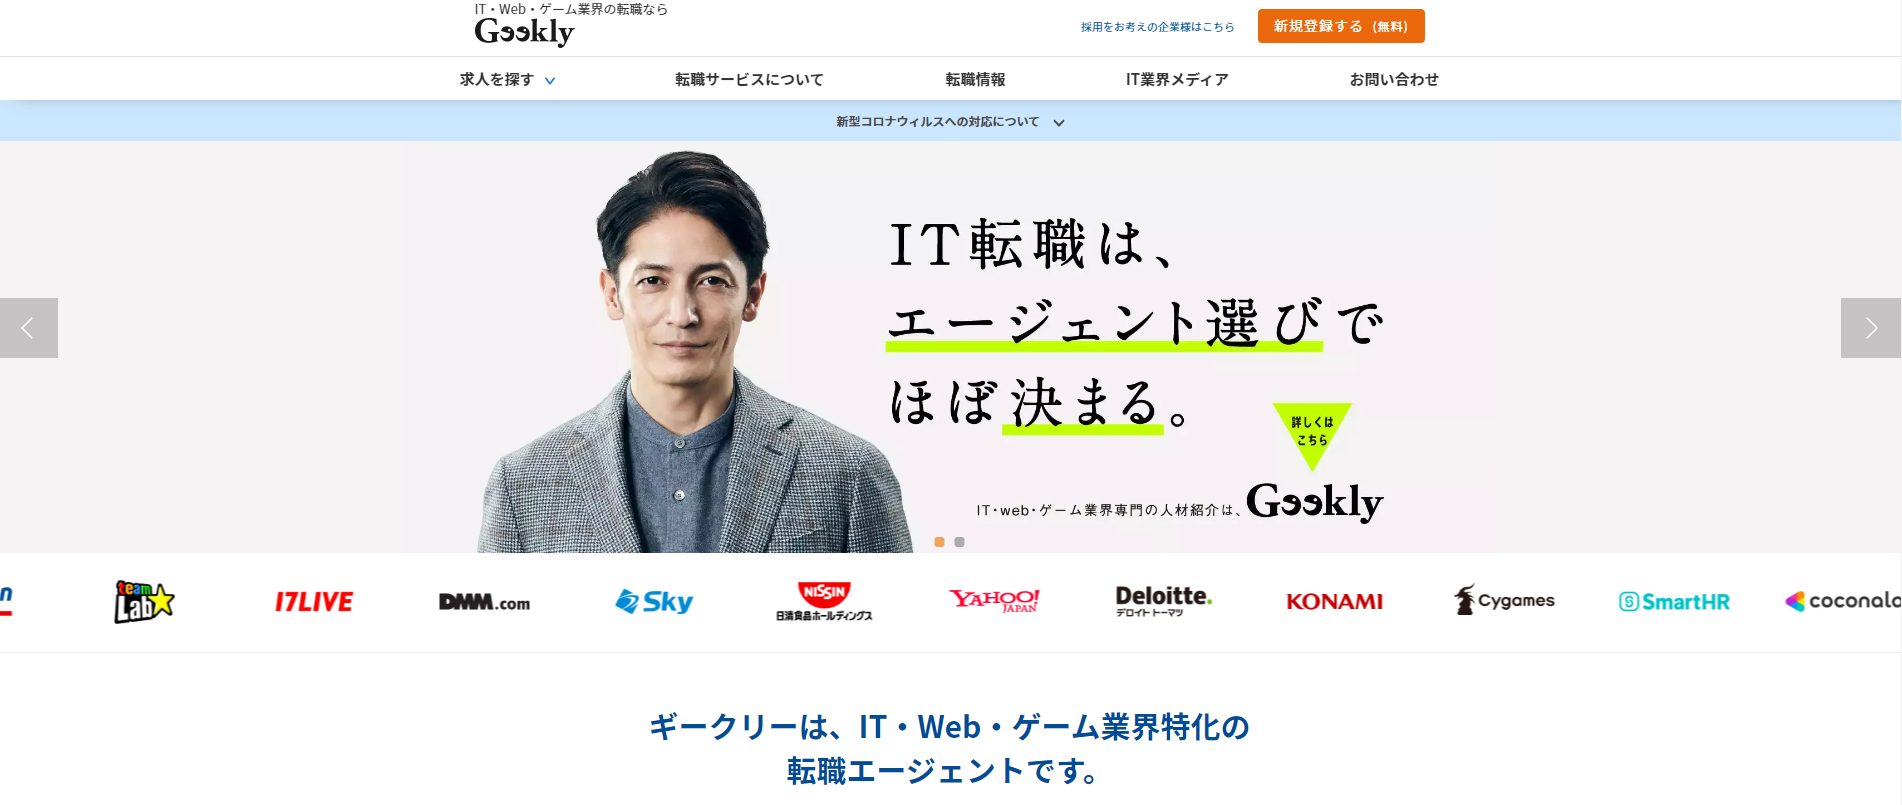 Geekly　公式